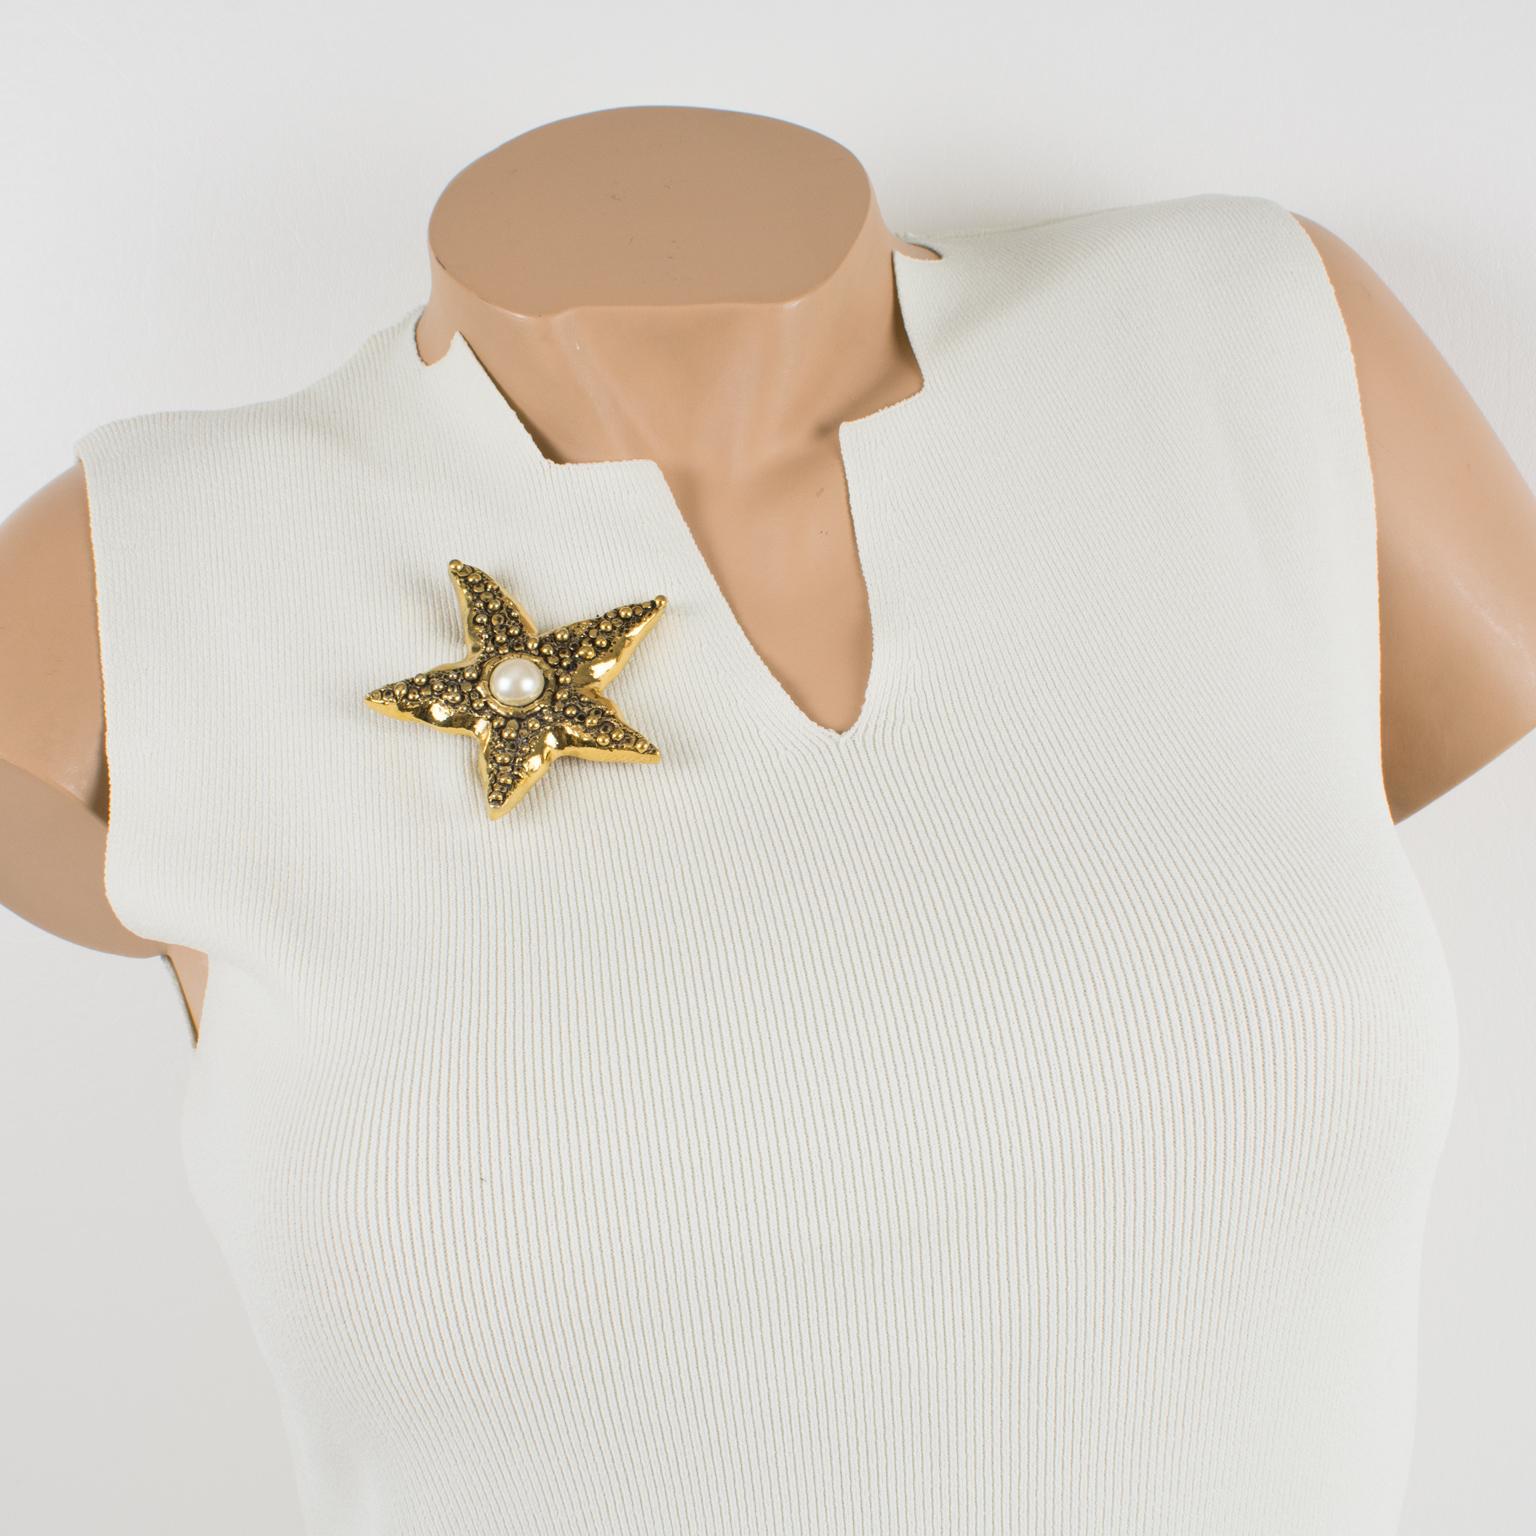 This elegant Guy Laroche Paris pin brooch features an oversized starfish shape with gilt metal all carved and textured ornate with pearl-like cabochon. There is the engraved brand signature at the back: 